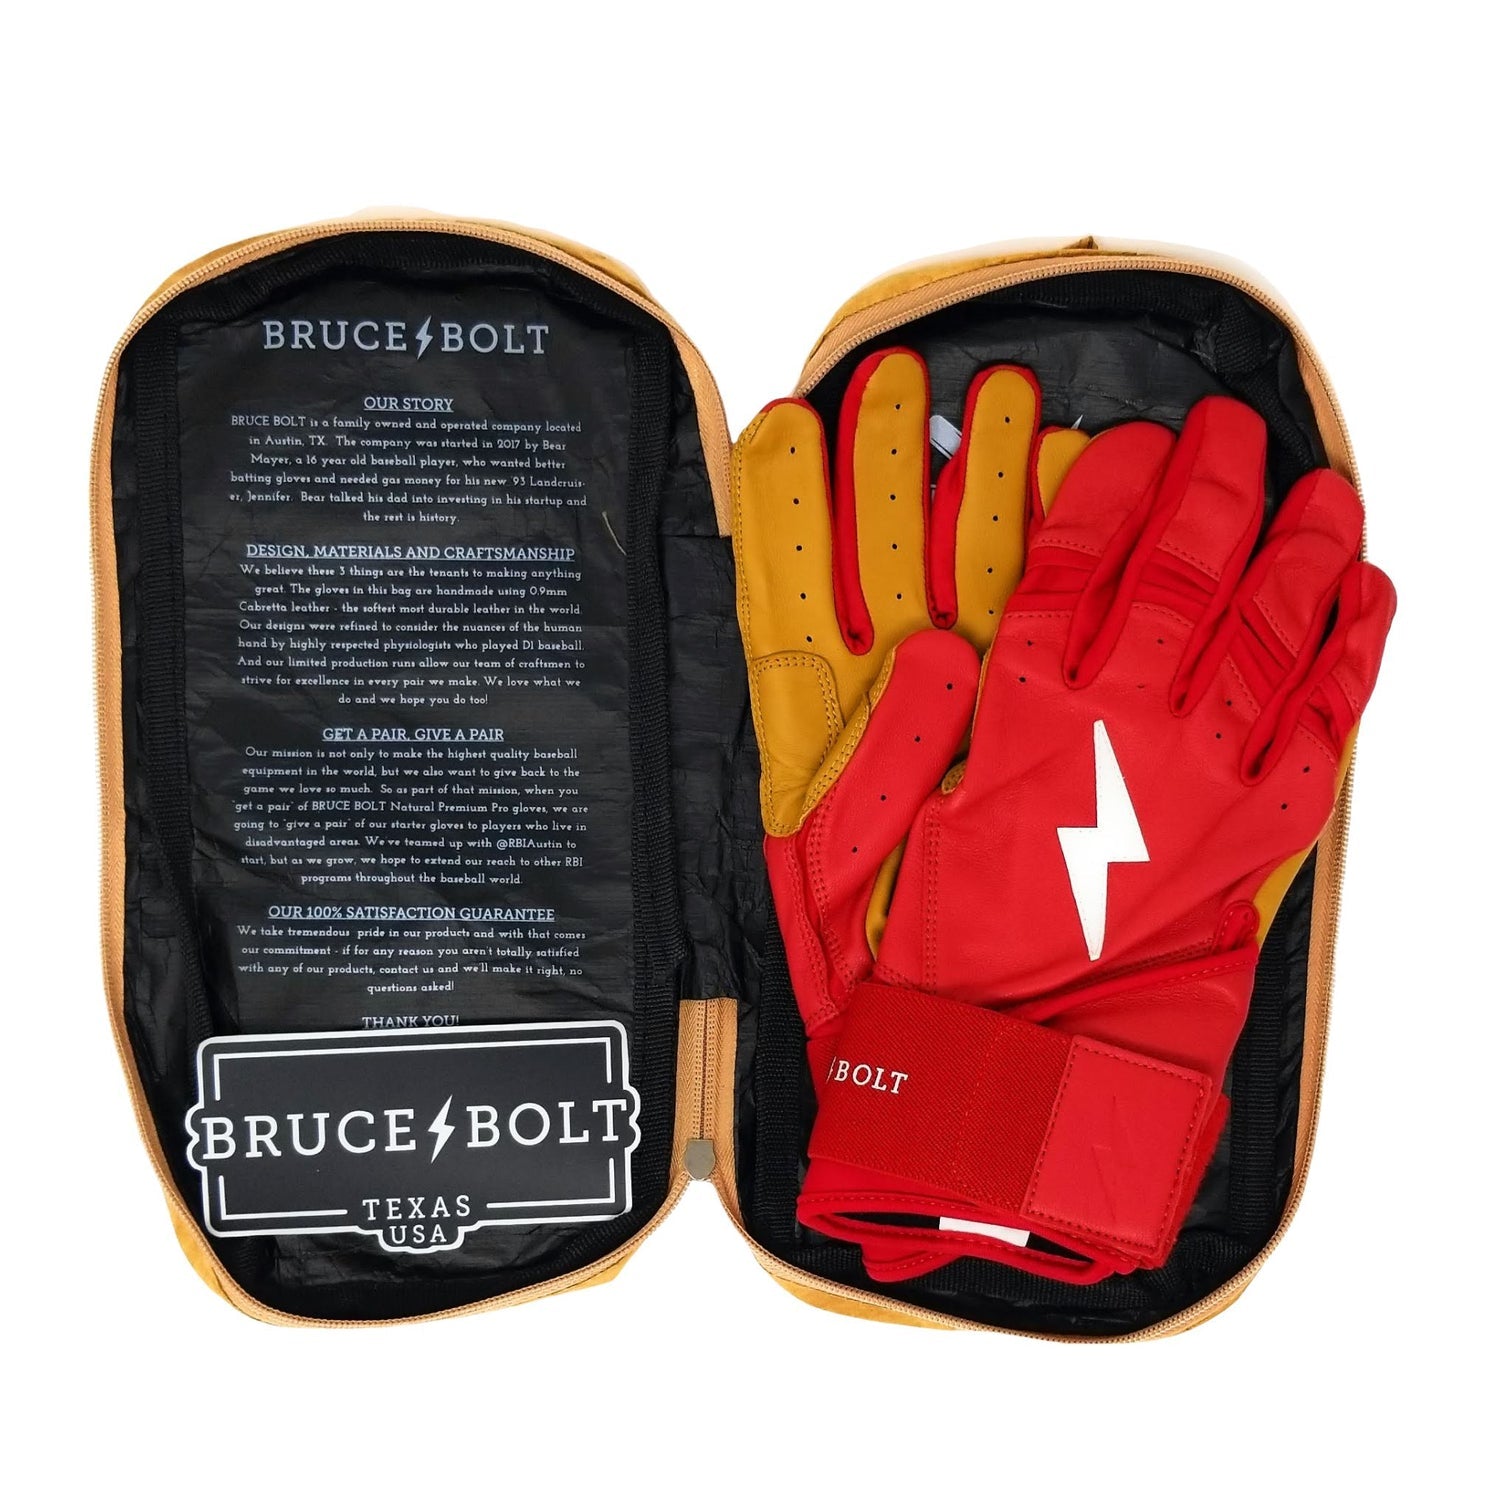 Bruce Bolt Youth Premium Pro Long Cuff Batting Gloves Red